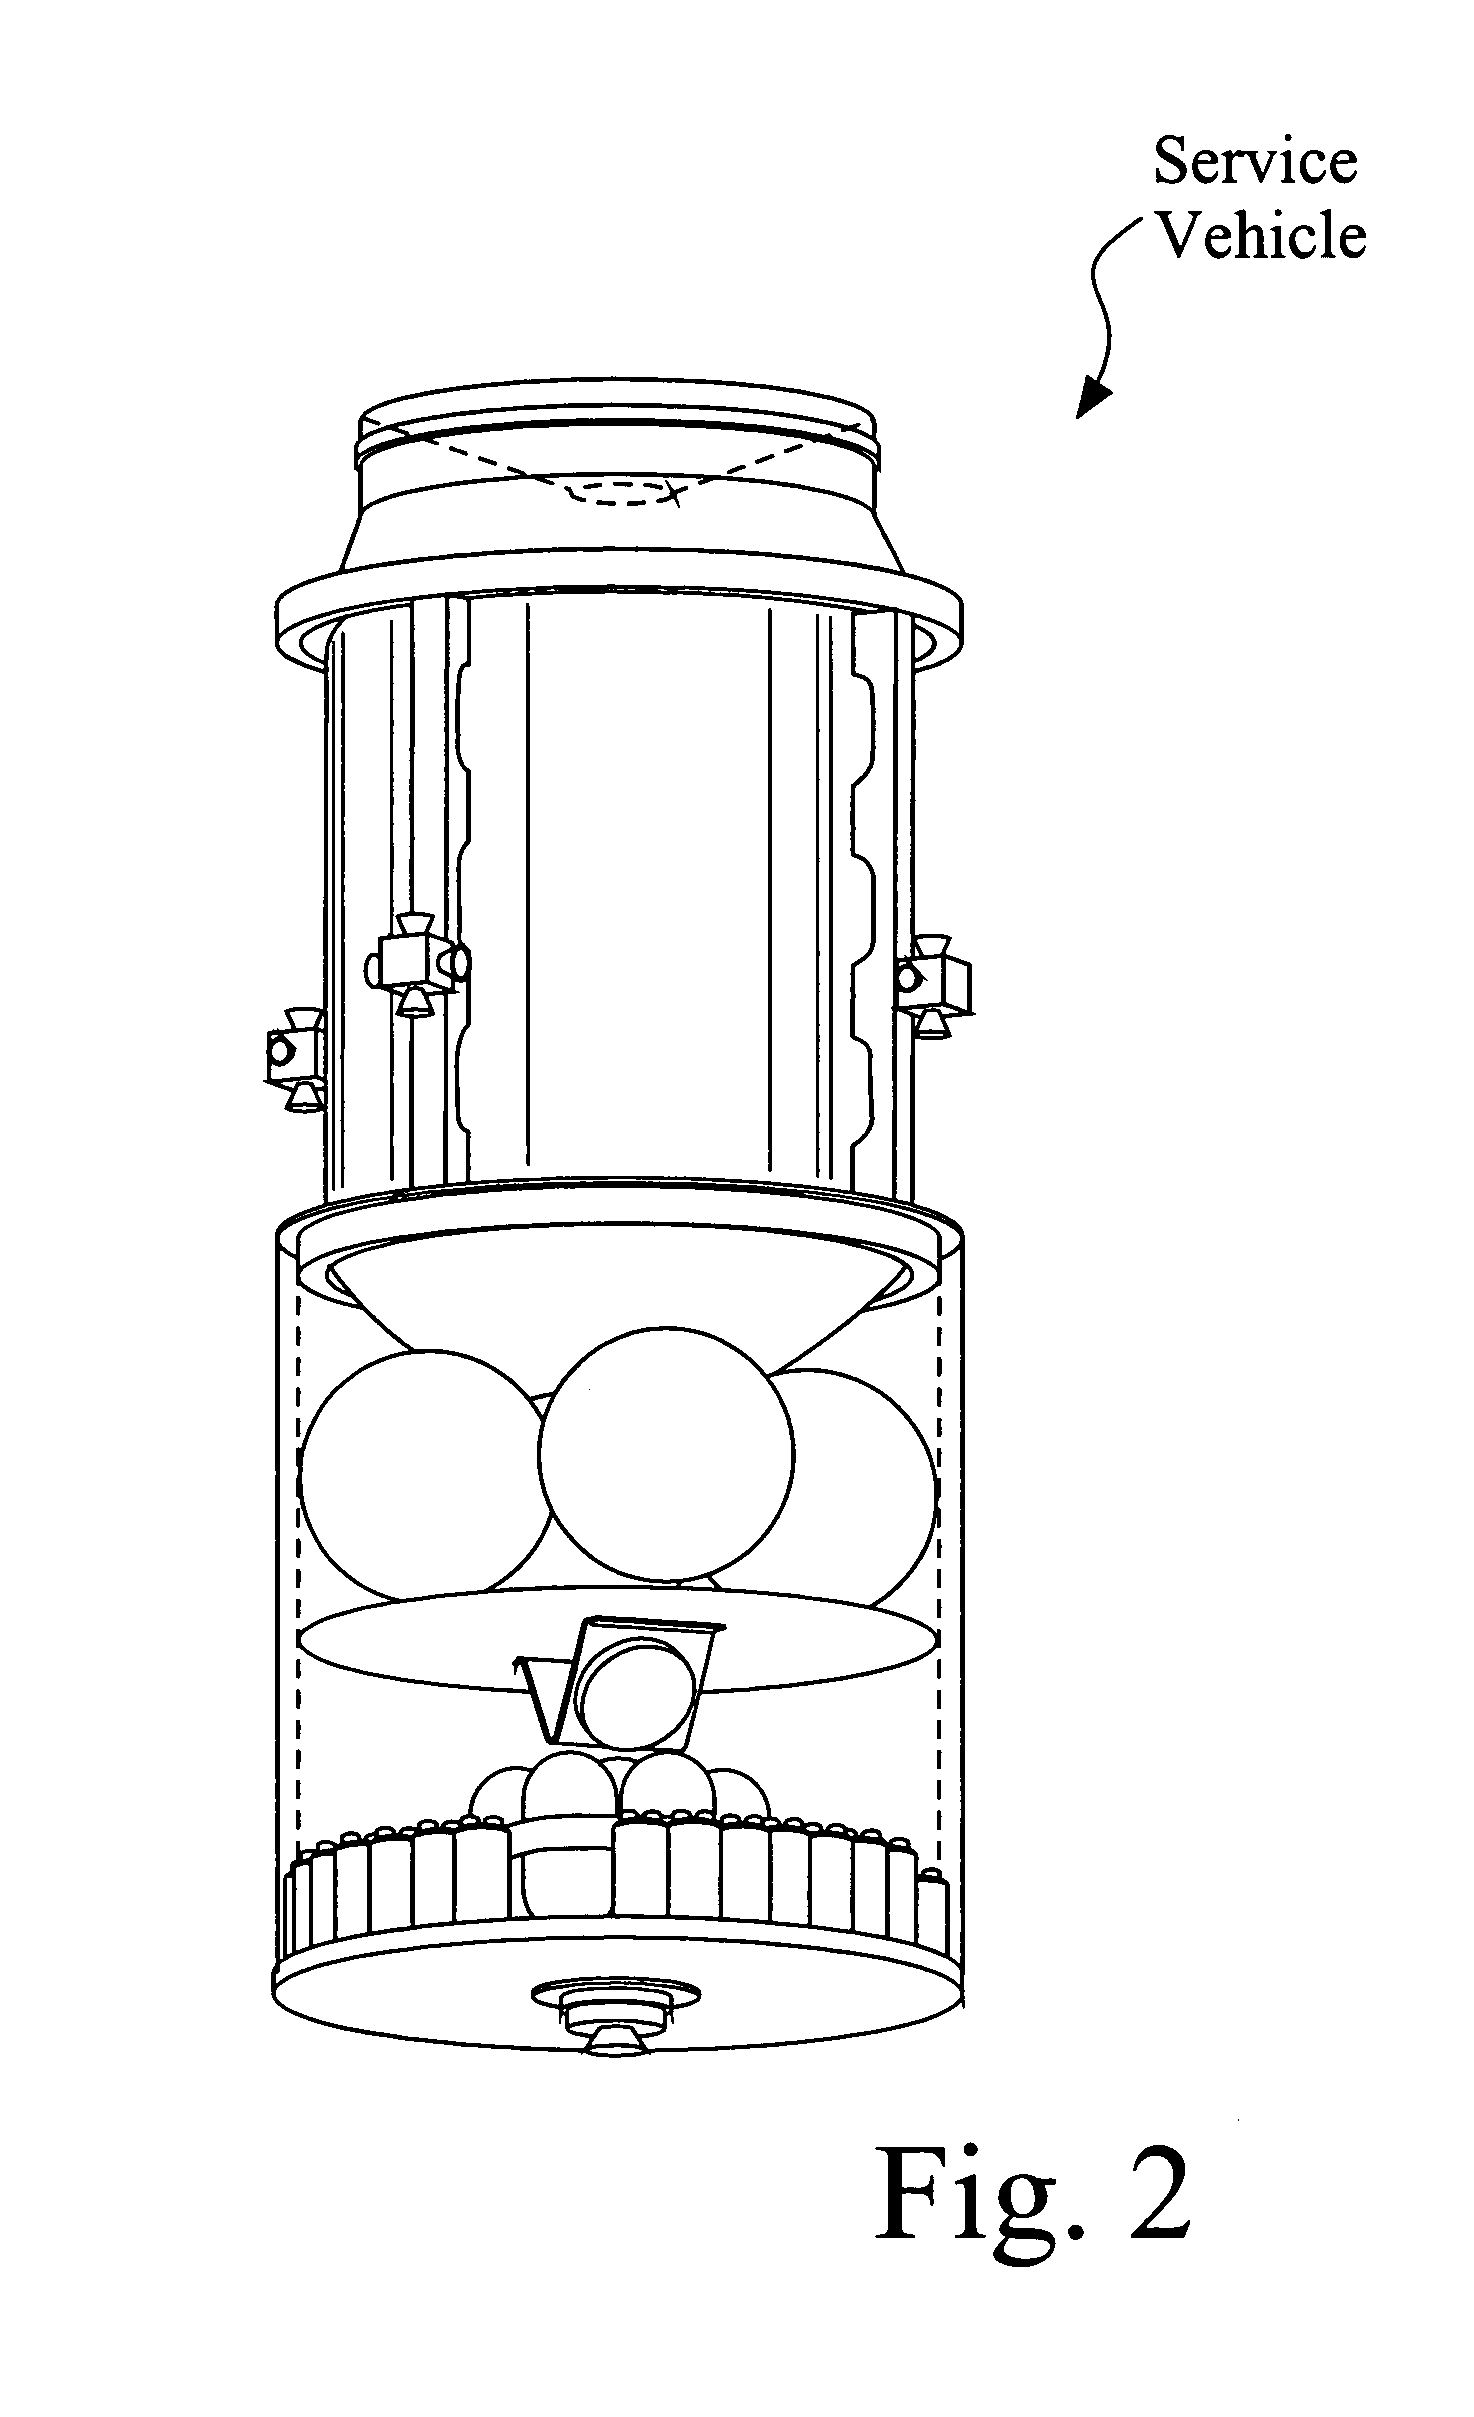 Orbit space transportation and recovery system